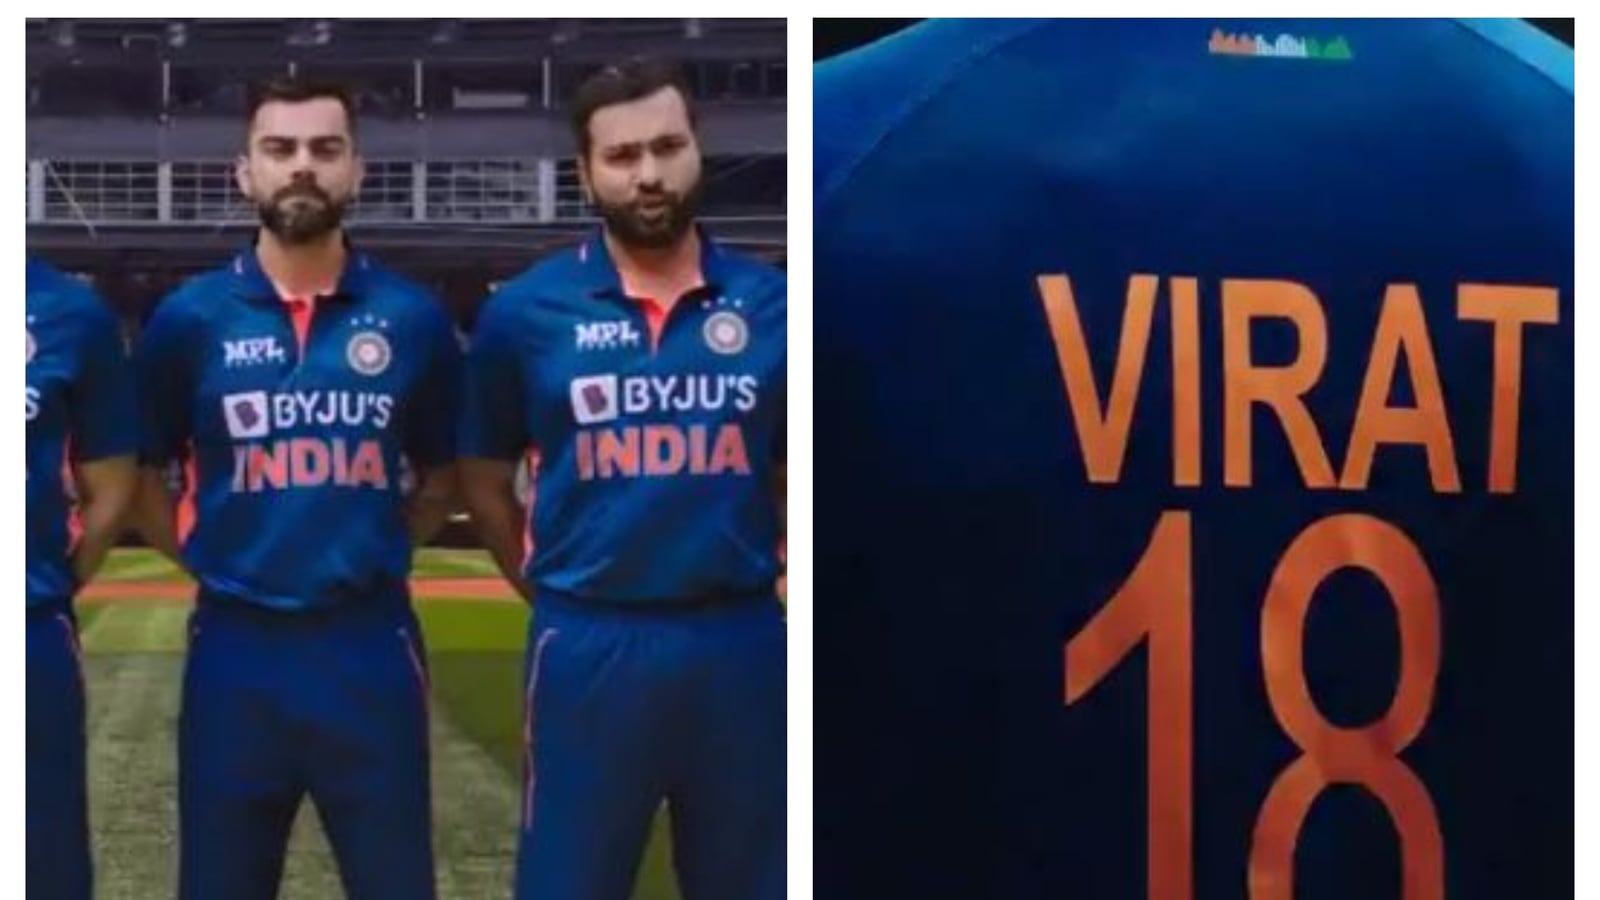 New India ‘Billion Cheers Jersey’ for T20 World Cup launched Cricket